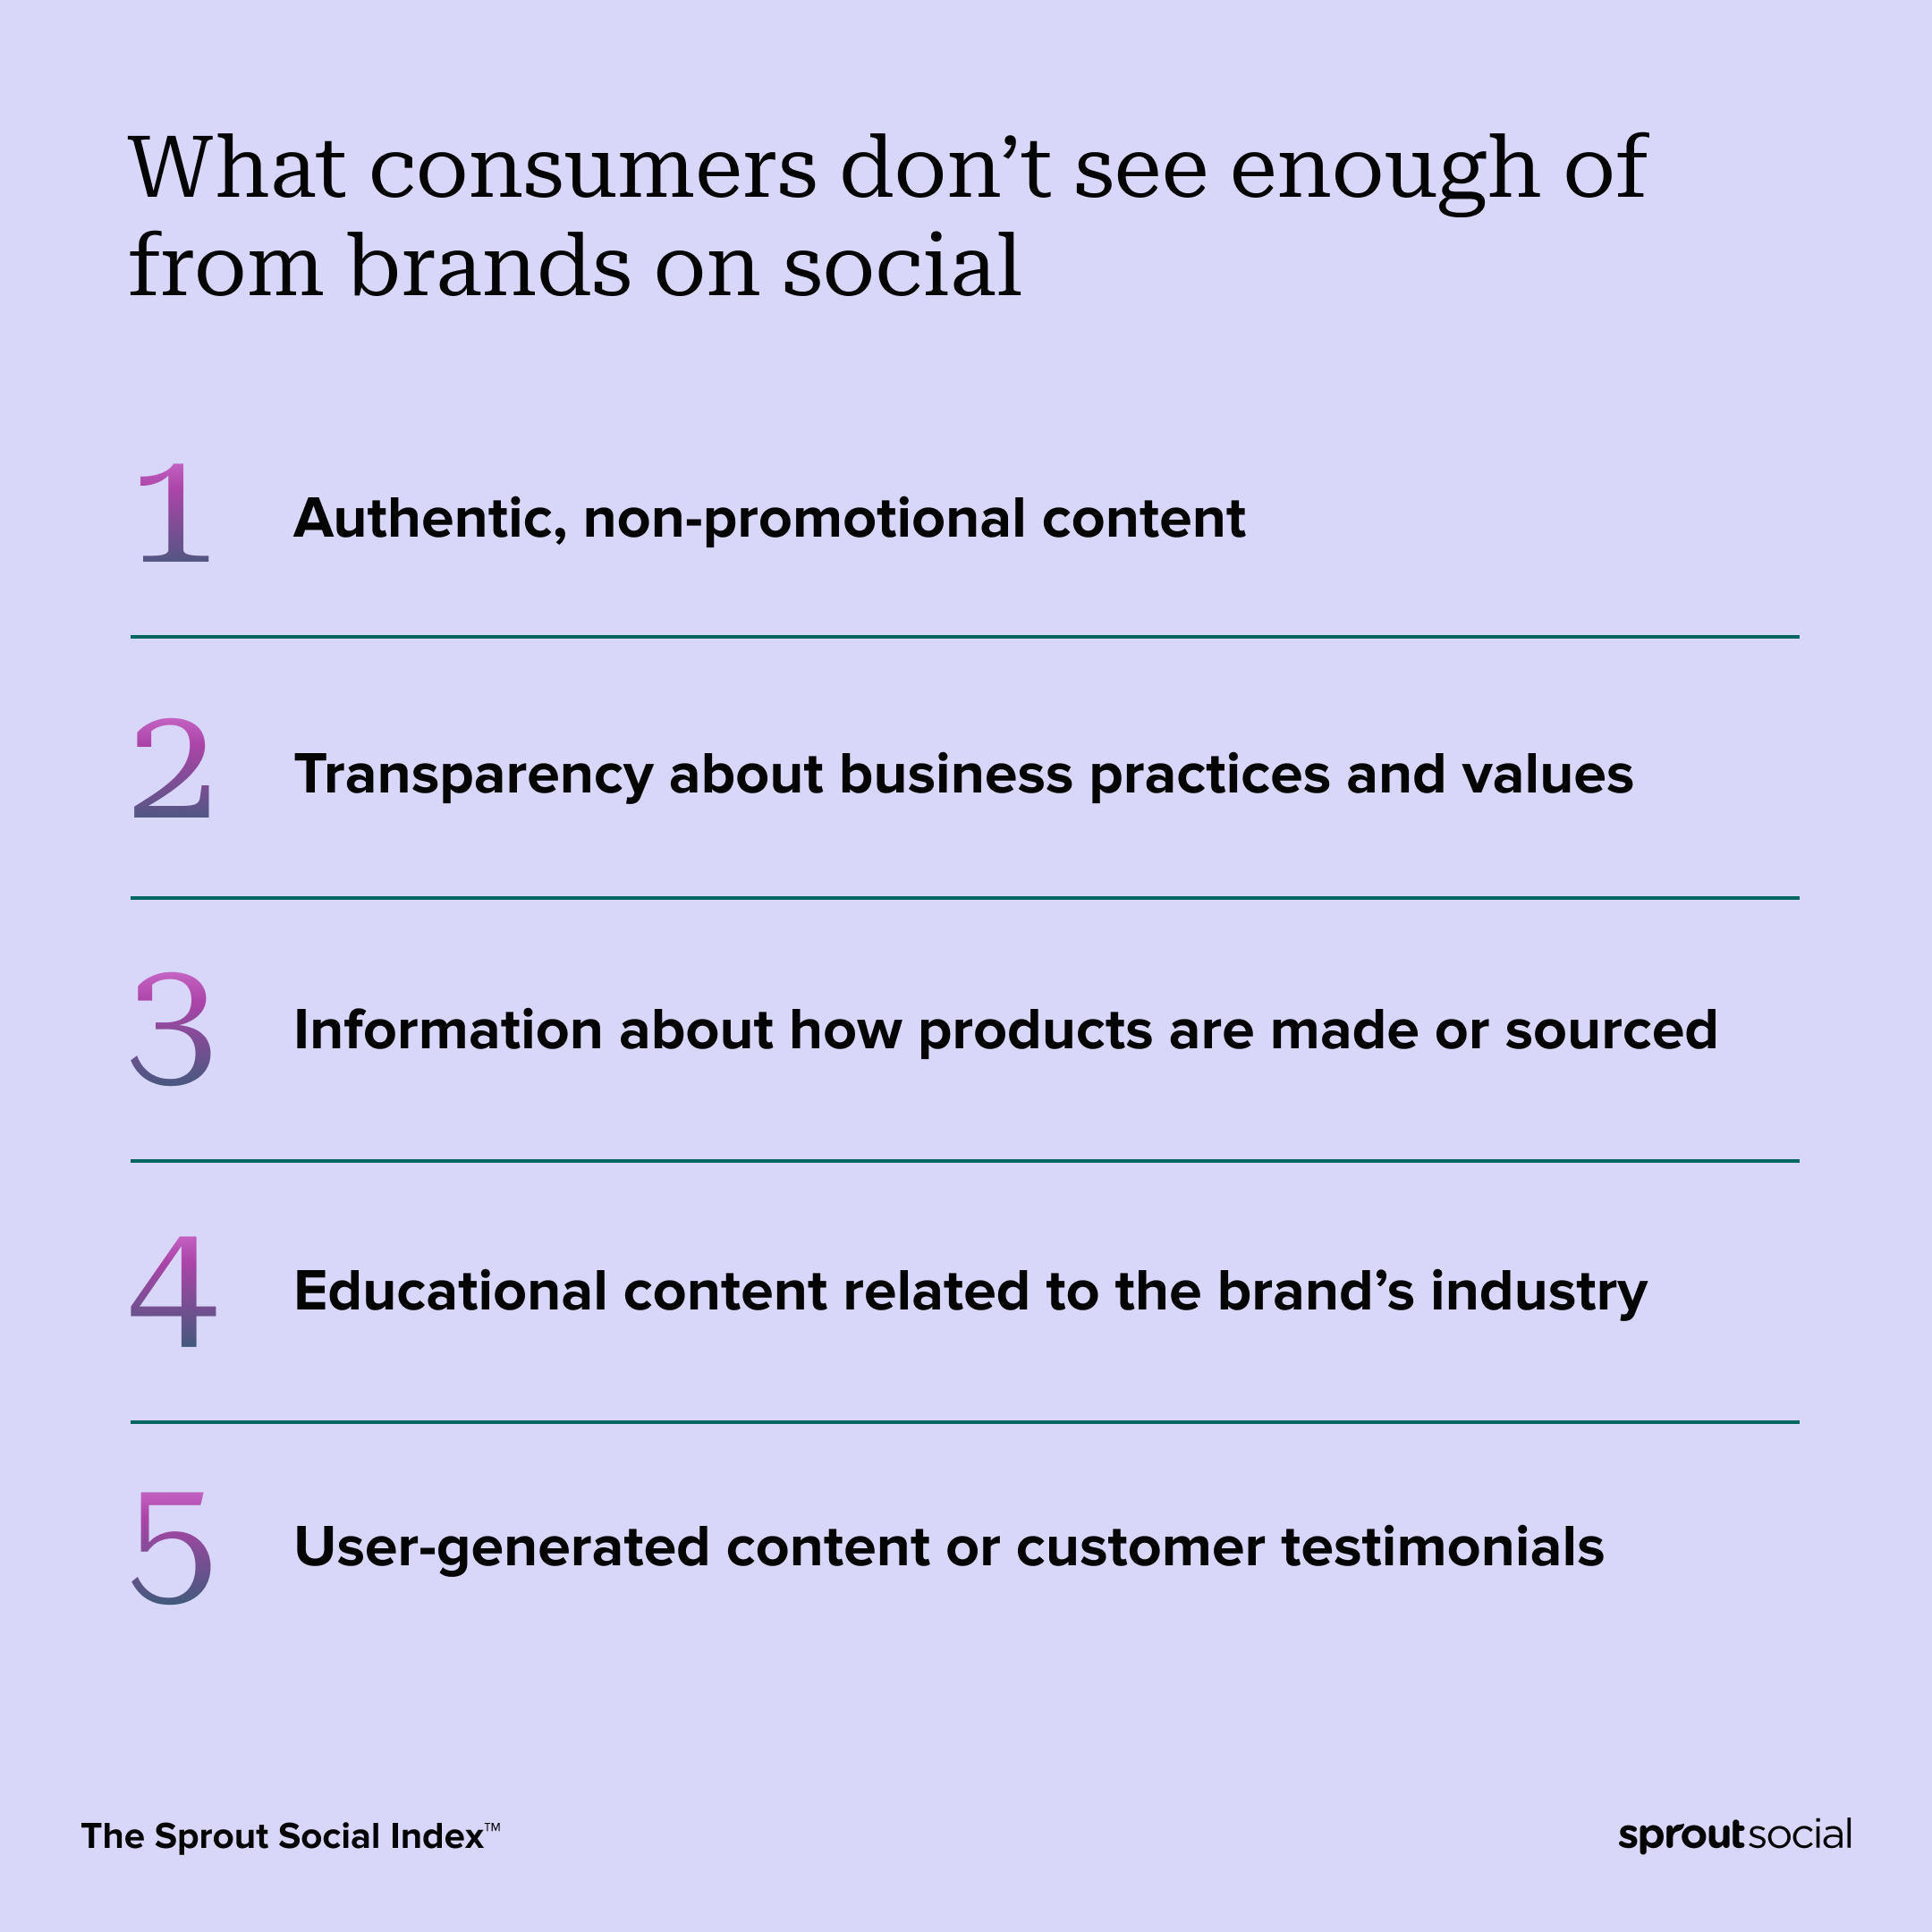 A text-based image that ranks what consumers say they don’t see enough of from brands on social media. The top response is, “authentic, non-promotional content”. 